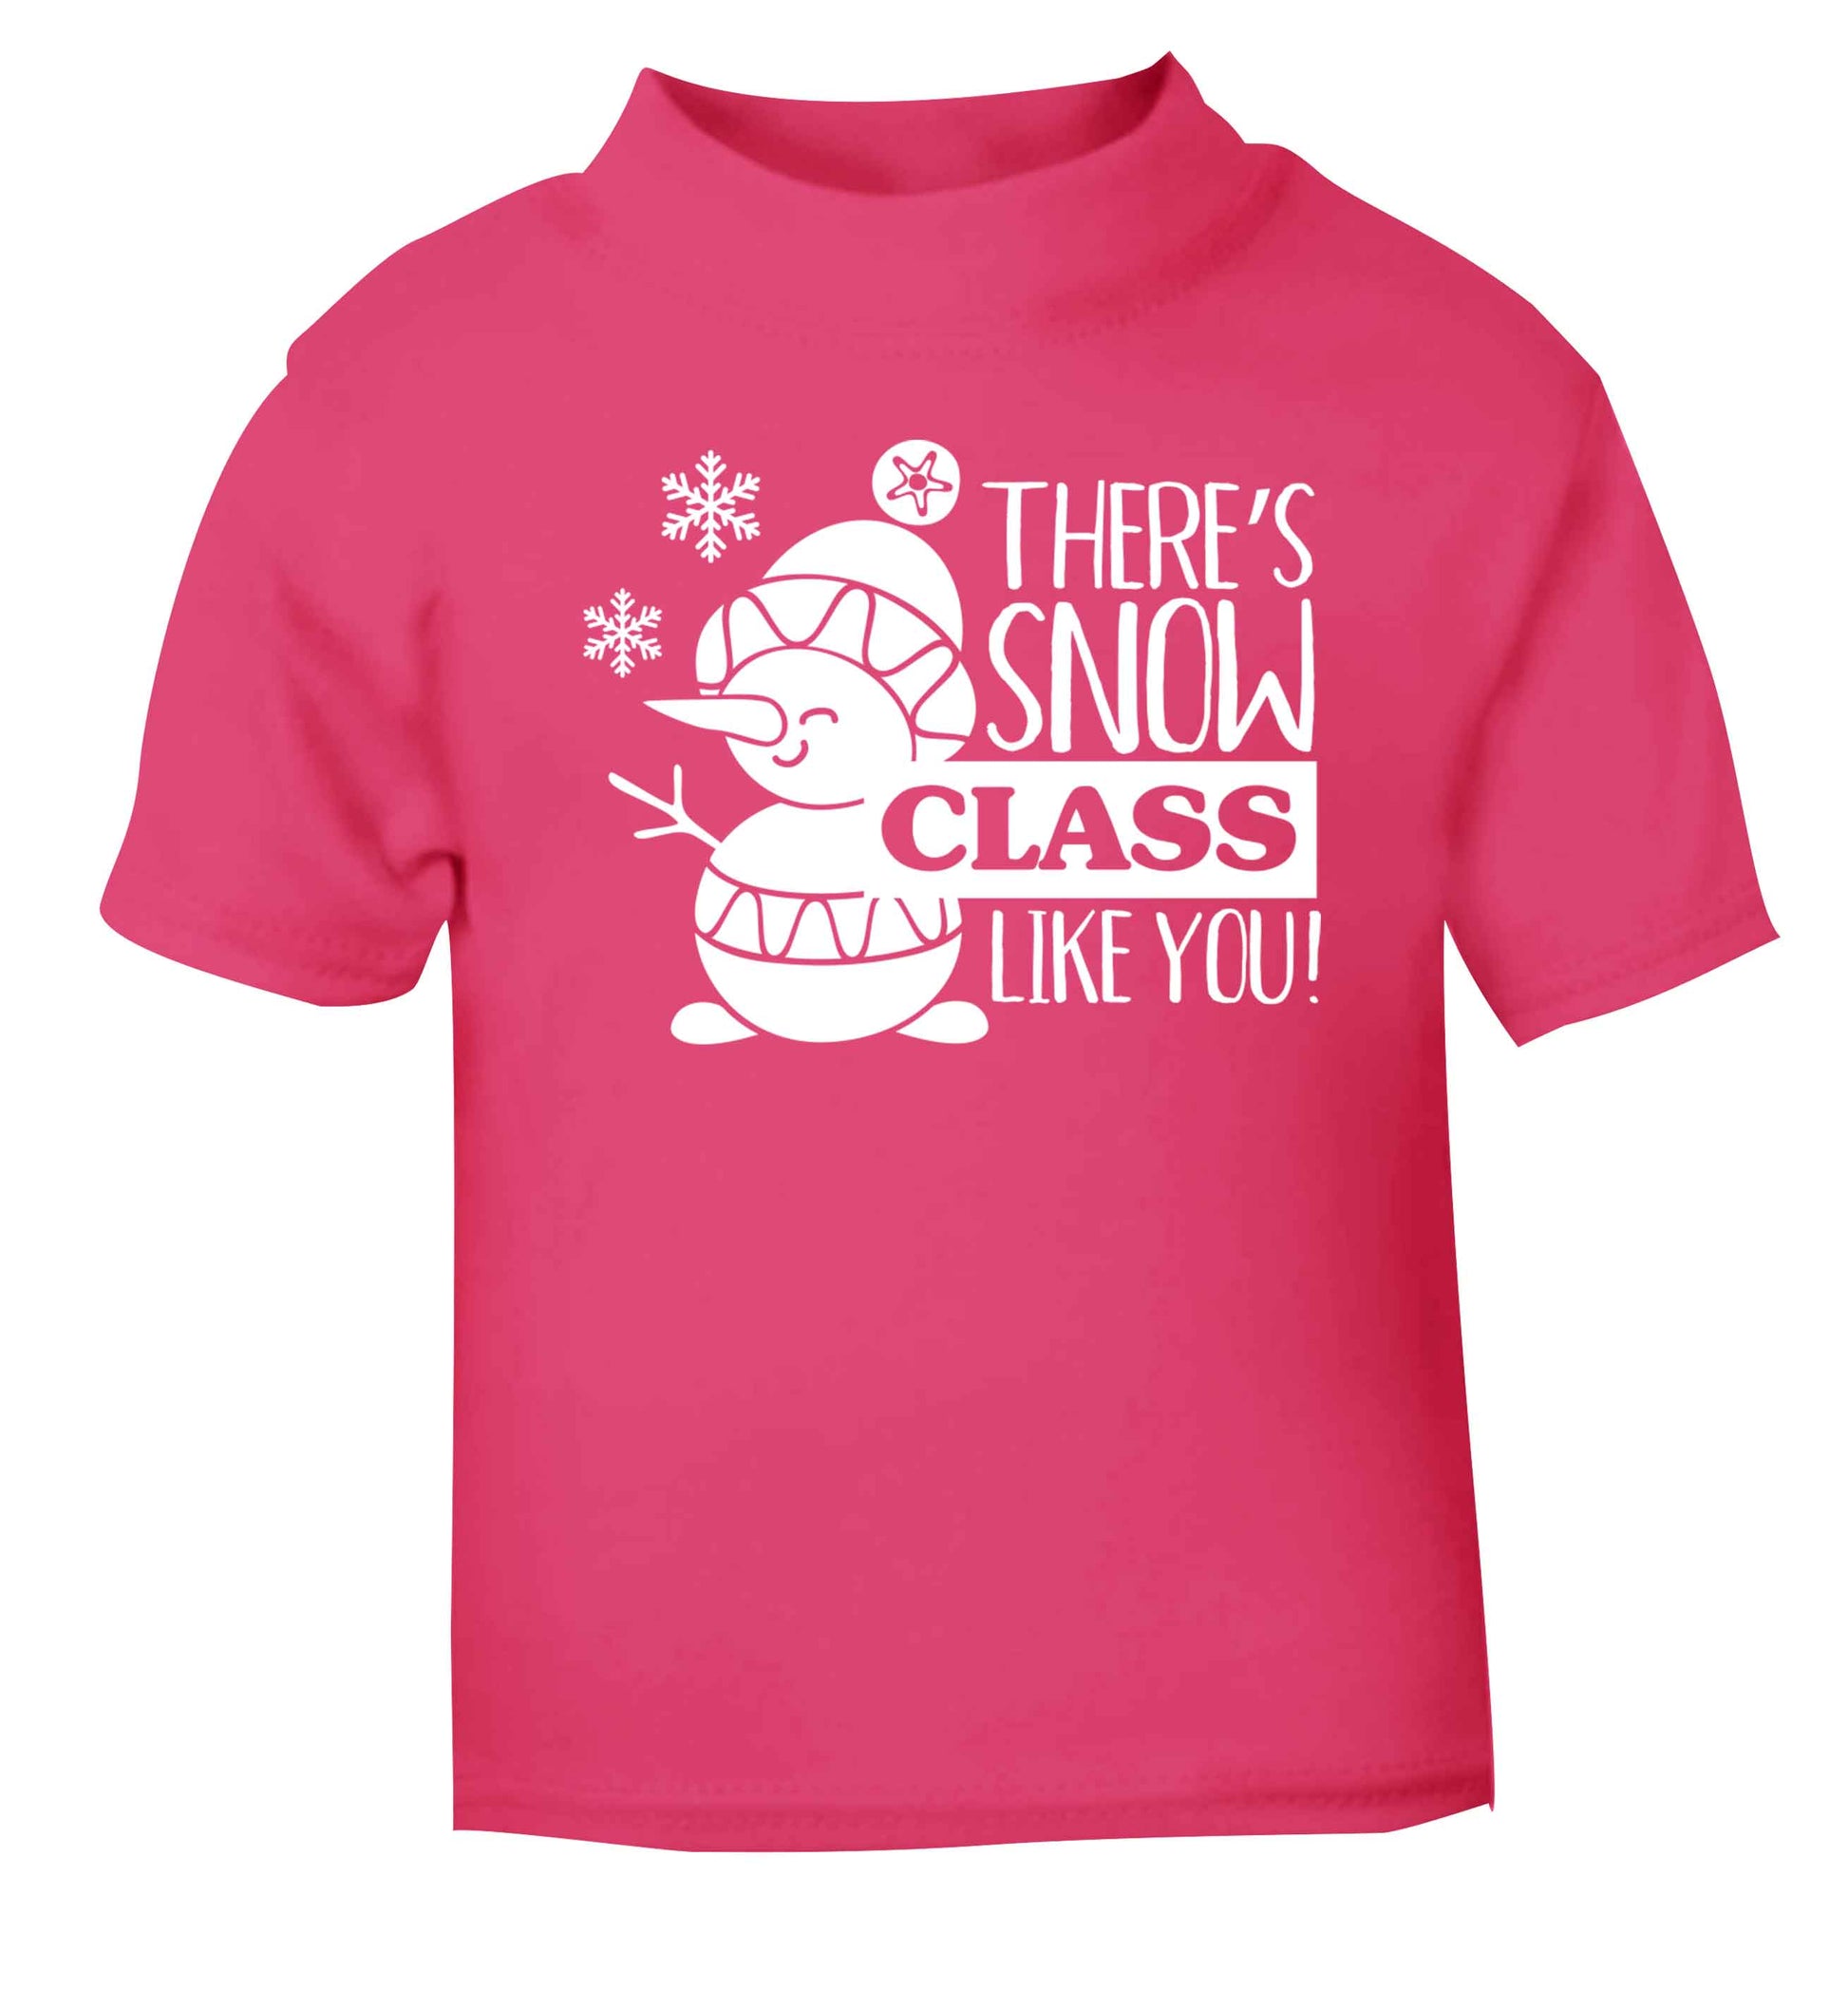 There's snow class like you pink baby toddler Tshirt 2 Years